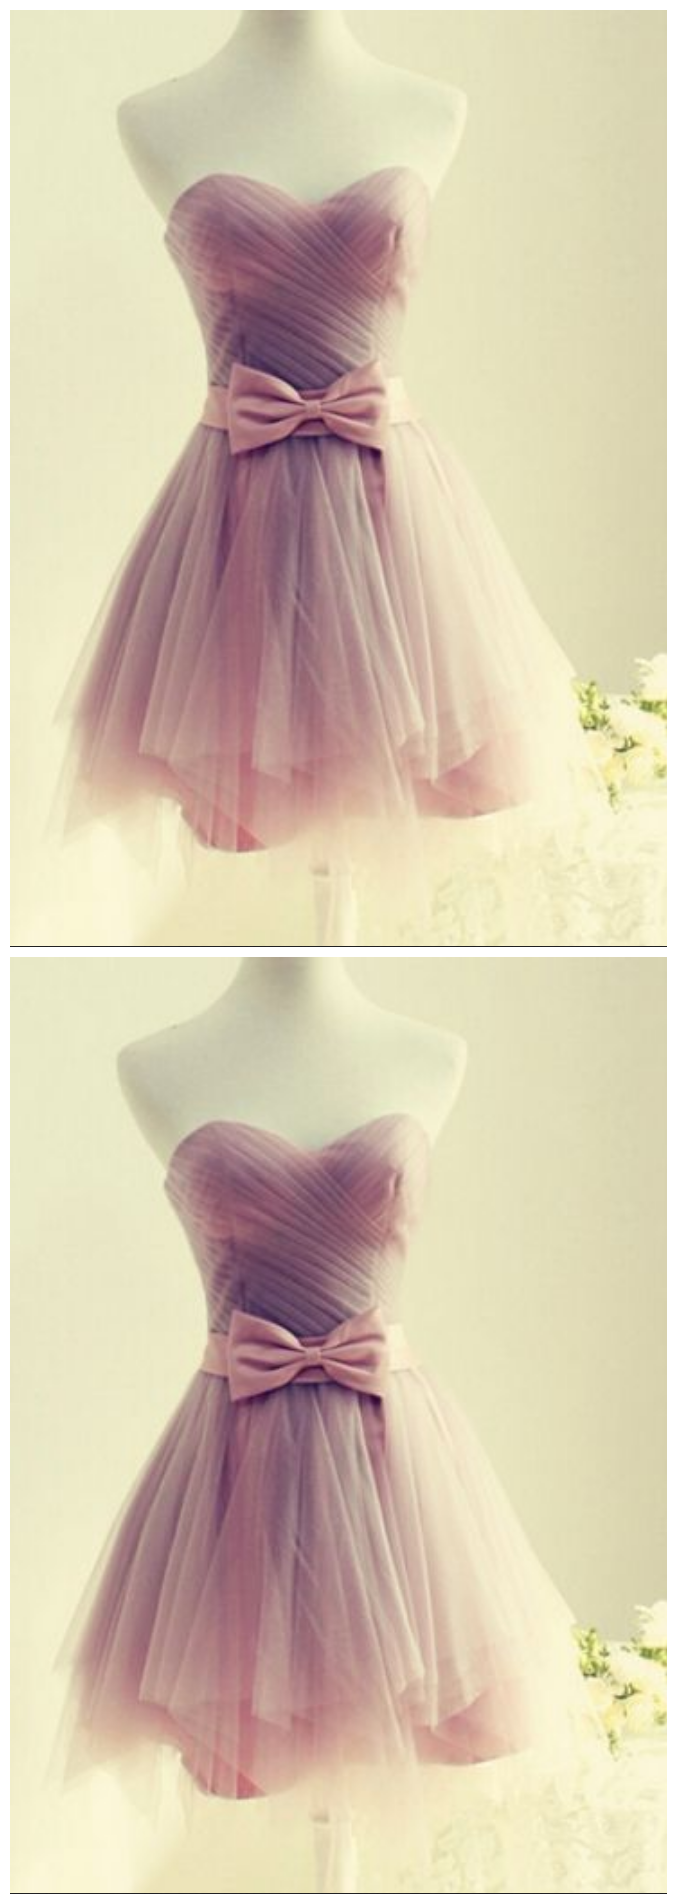 Sweetheart Homecoming Dresses, Pink Short Homecoming Dresses, Elegant Sweetheart Cute Short Tulle Homecoming Dresses For Girls ,evening Gowns